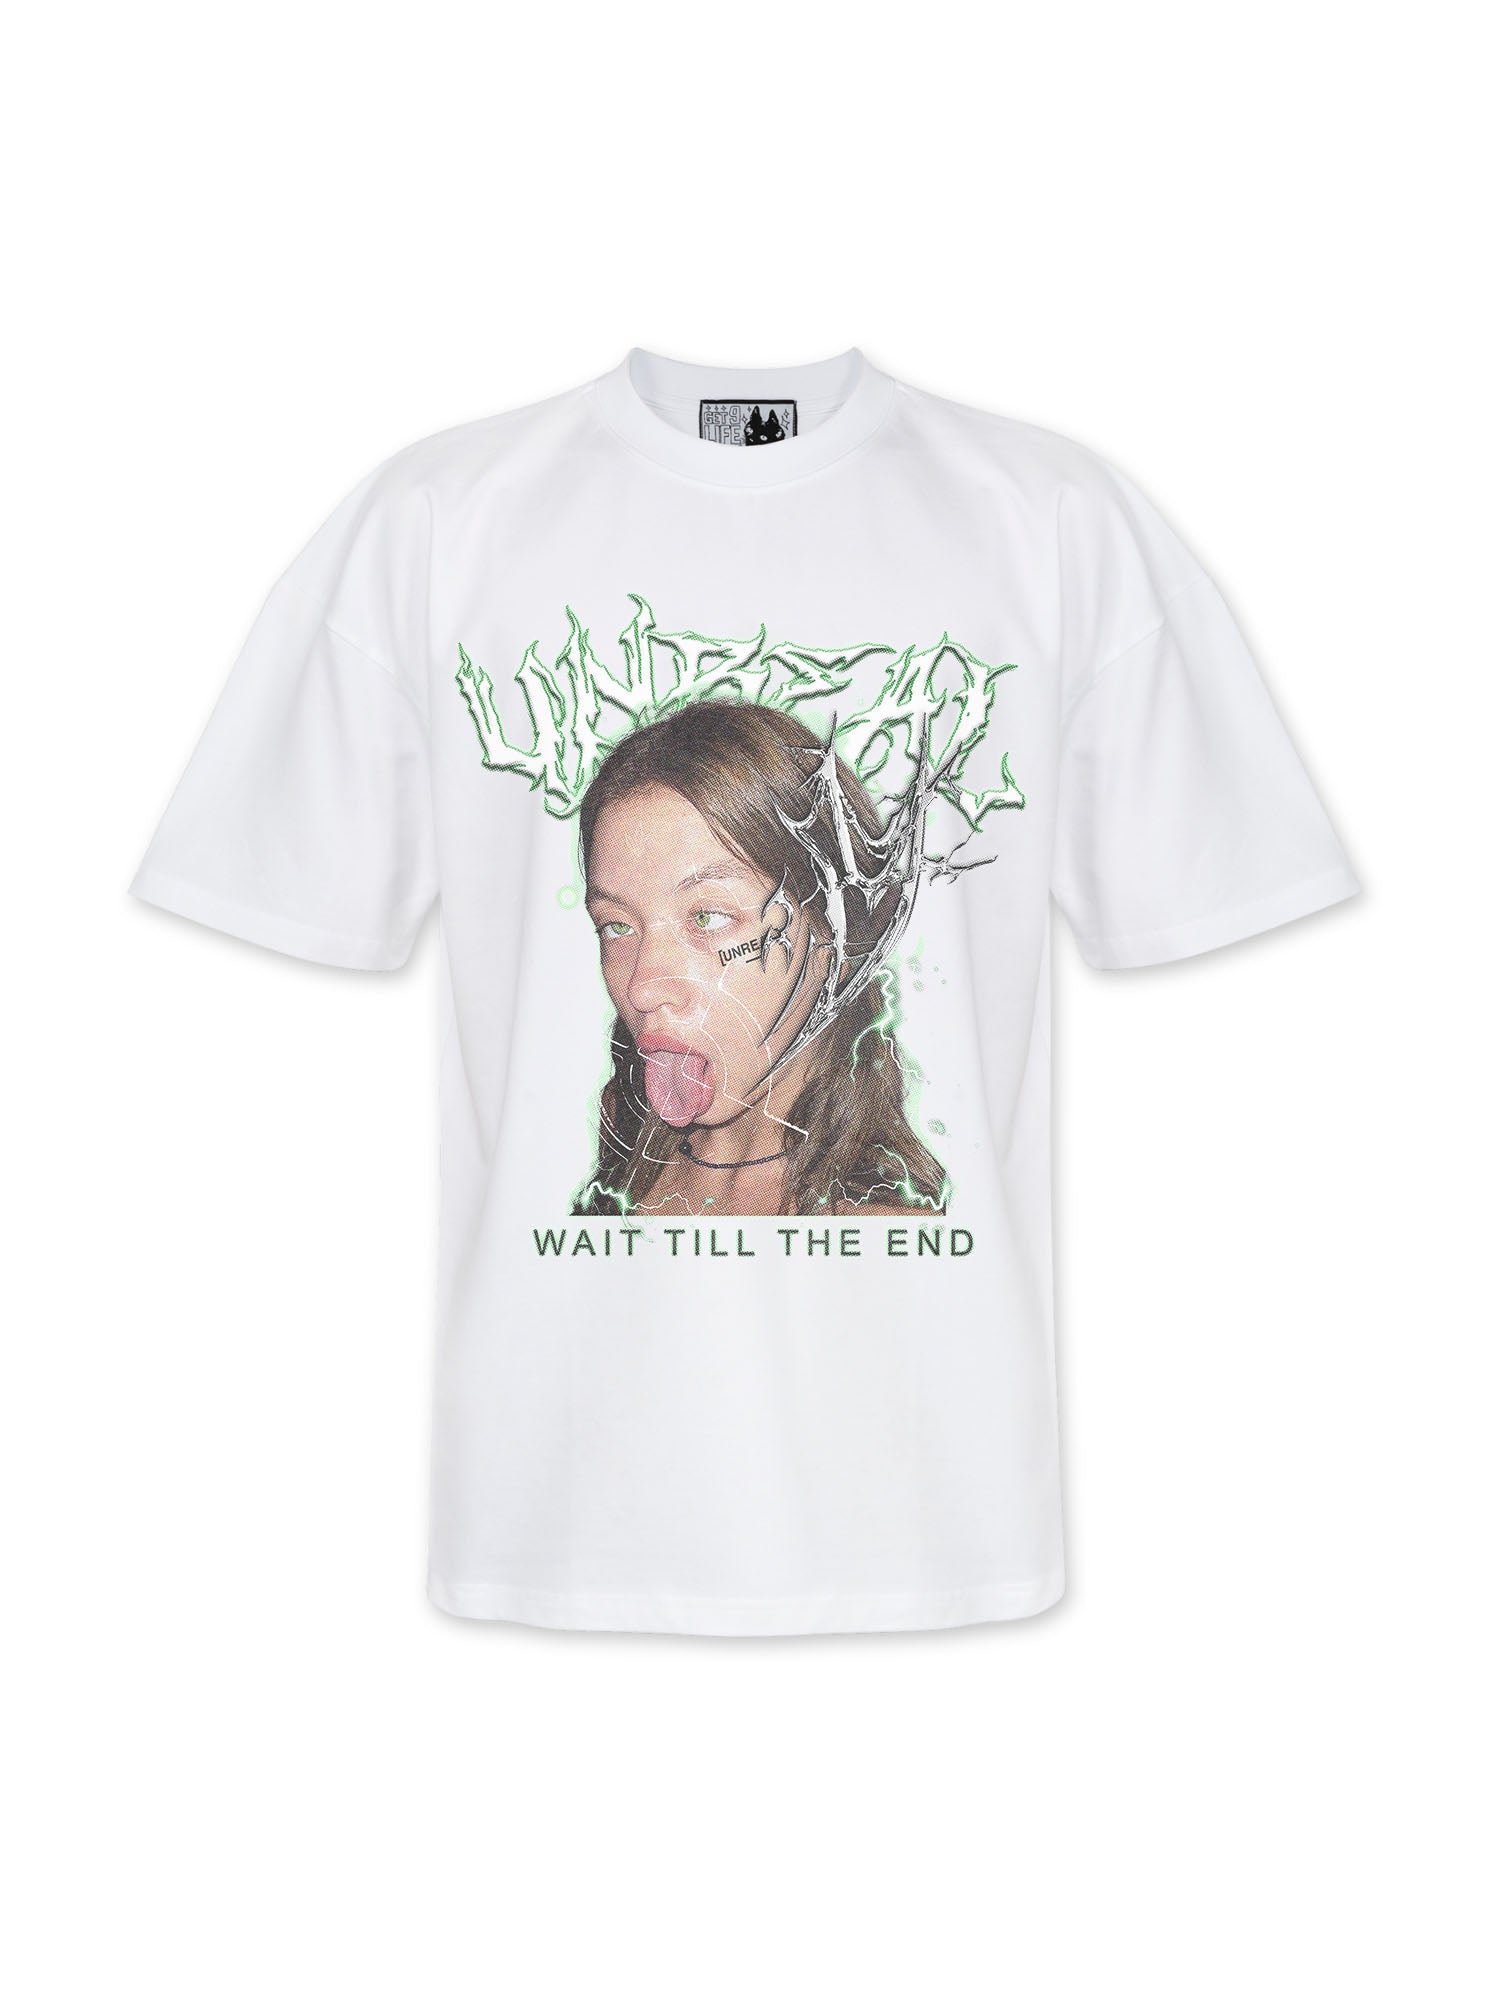 UNREAL Cute Face Tee - White heavy cotton tee made in Portugal - [UNREAL]industries Streetwear